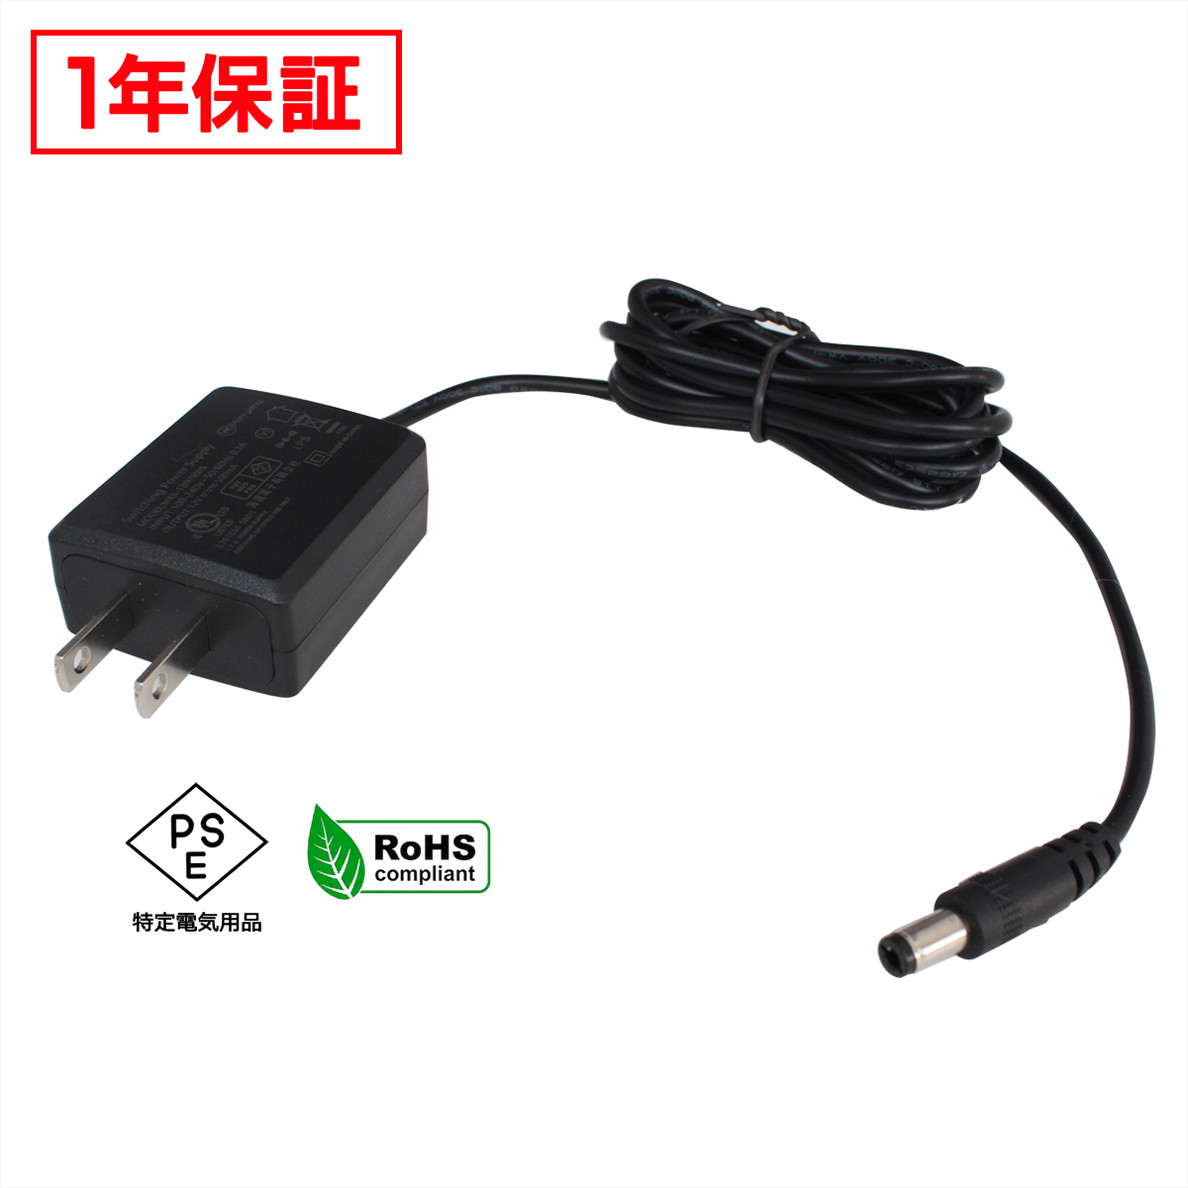 AC adaptor all-purpose power supply 12V 0.5A 6W 5.5mm 2.1mm PSE certification 1 year guarantee 